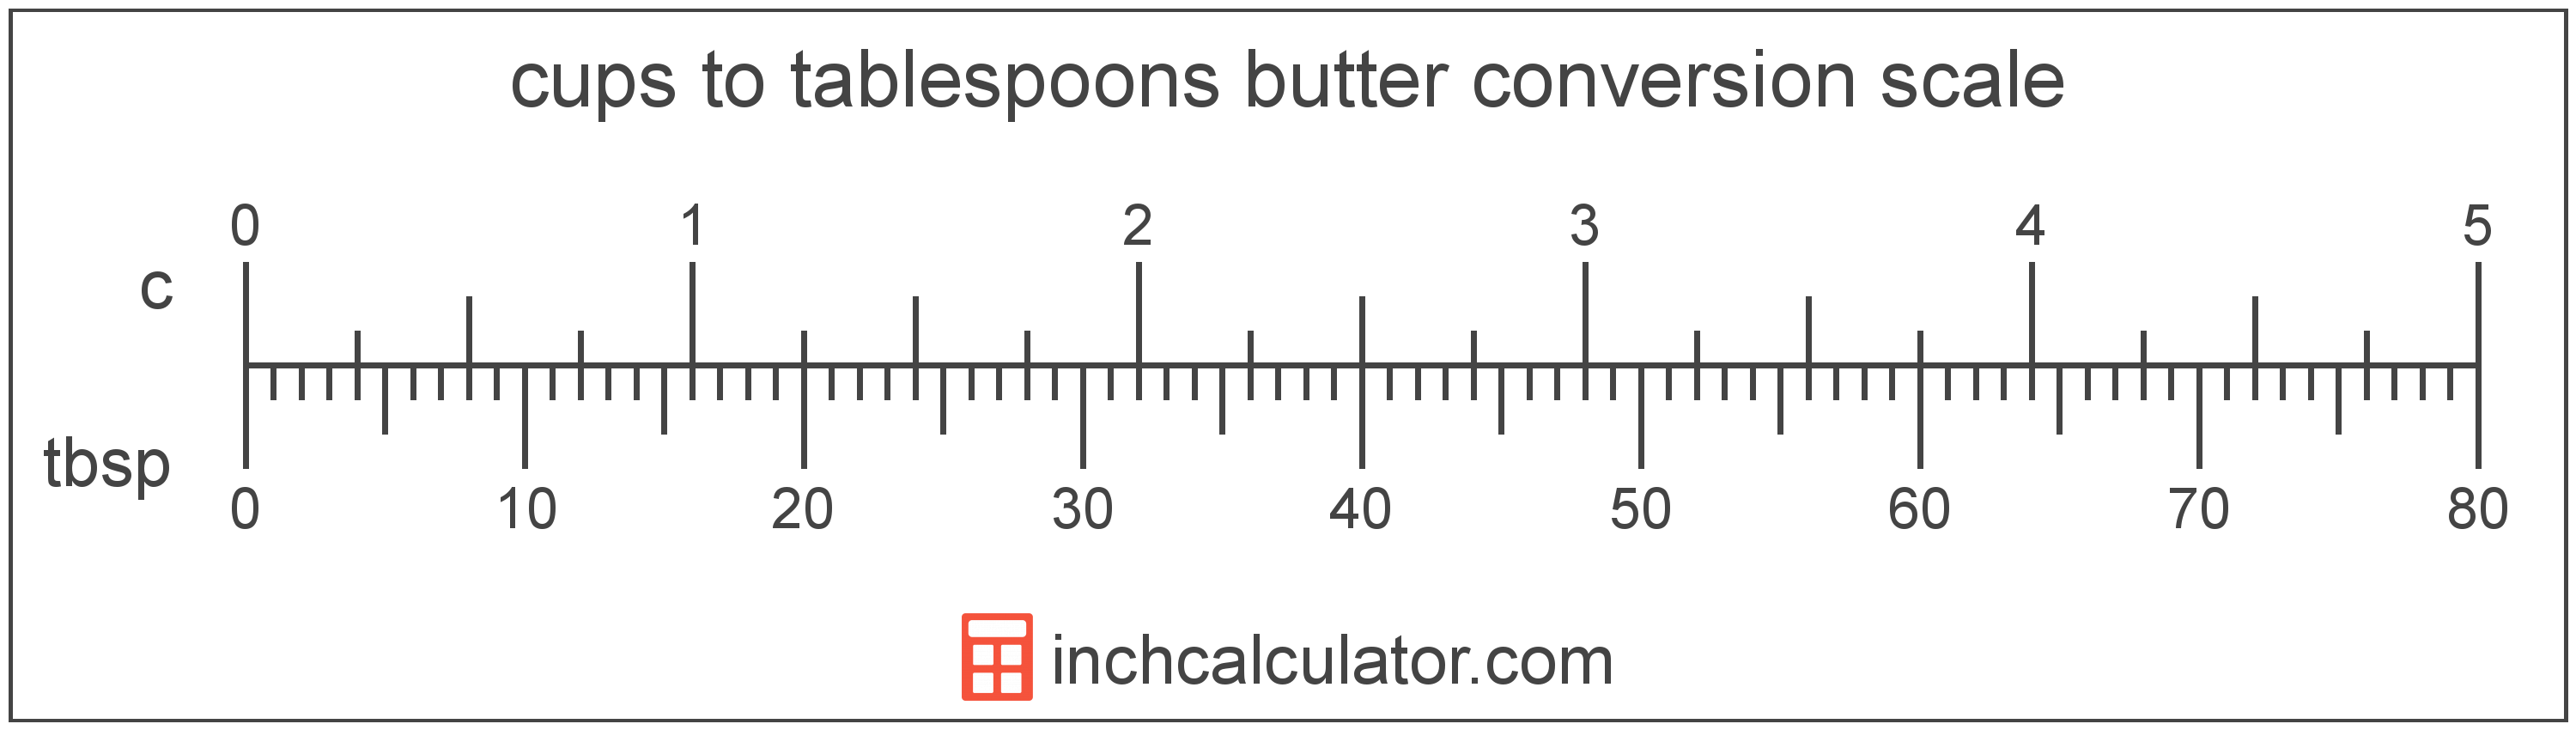 conversion scale showing cups and equivalent tablespoons butter values